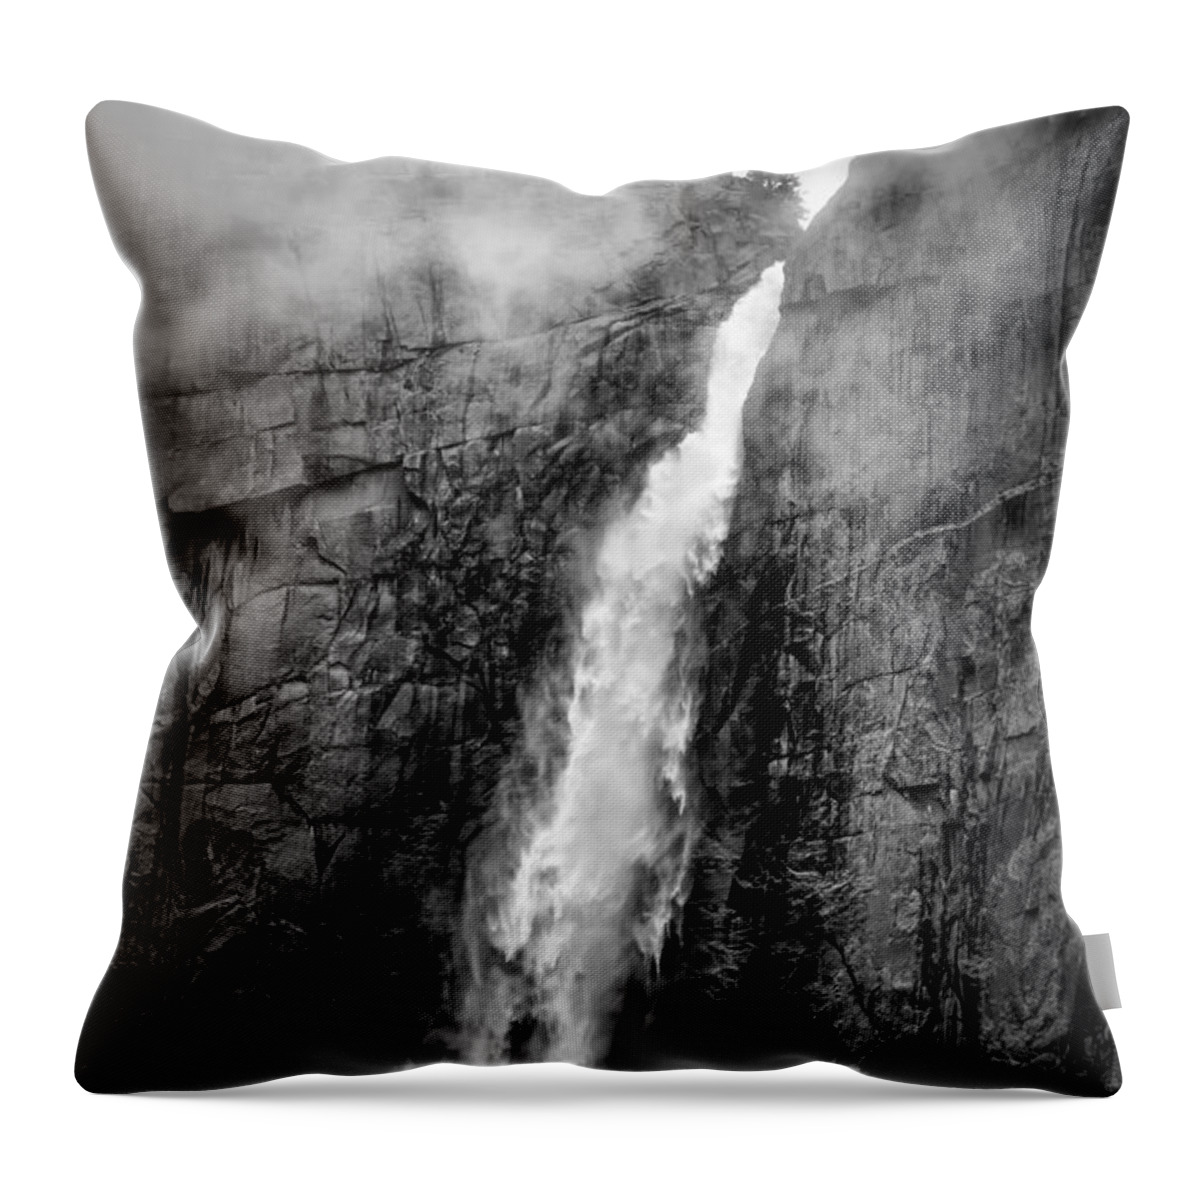 Yosemite Throw Pillow featuring the photograph Yosemite Fall by Anthony Michael Bonafede